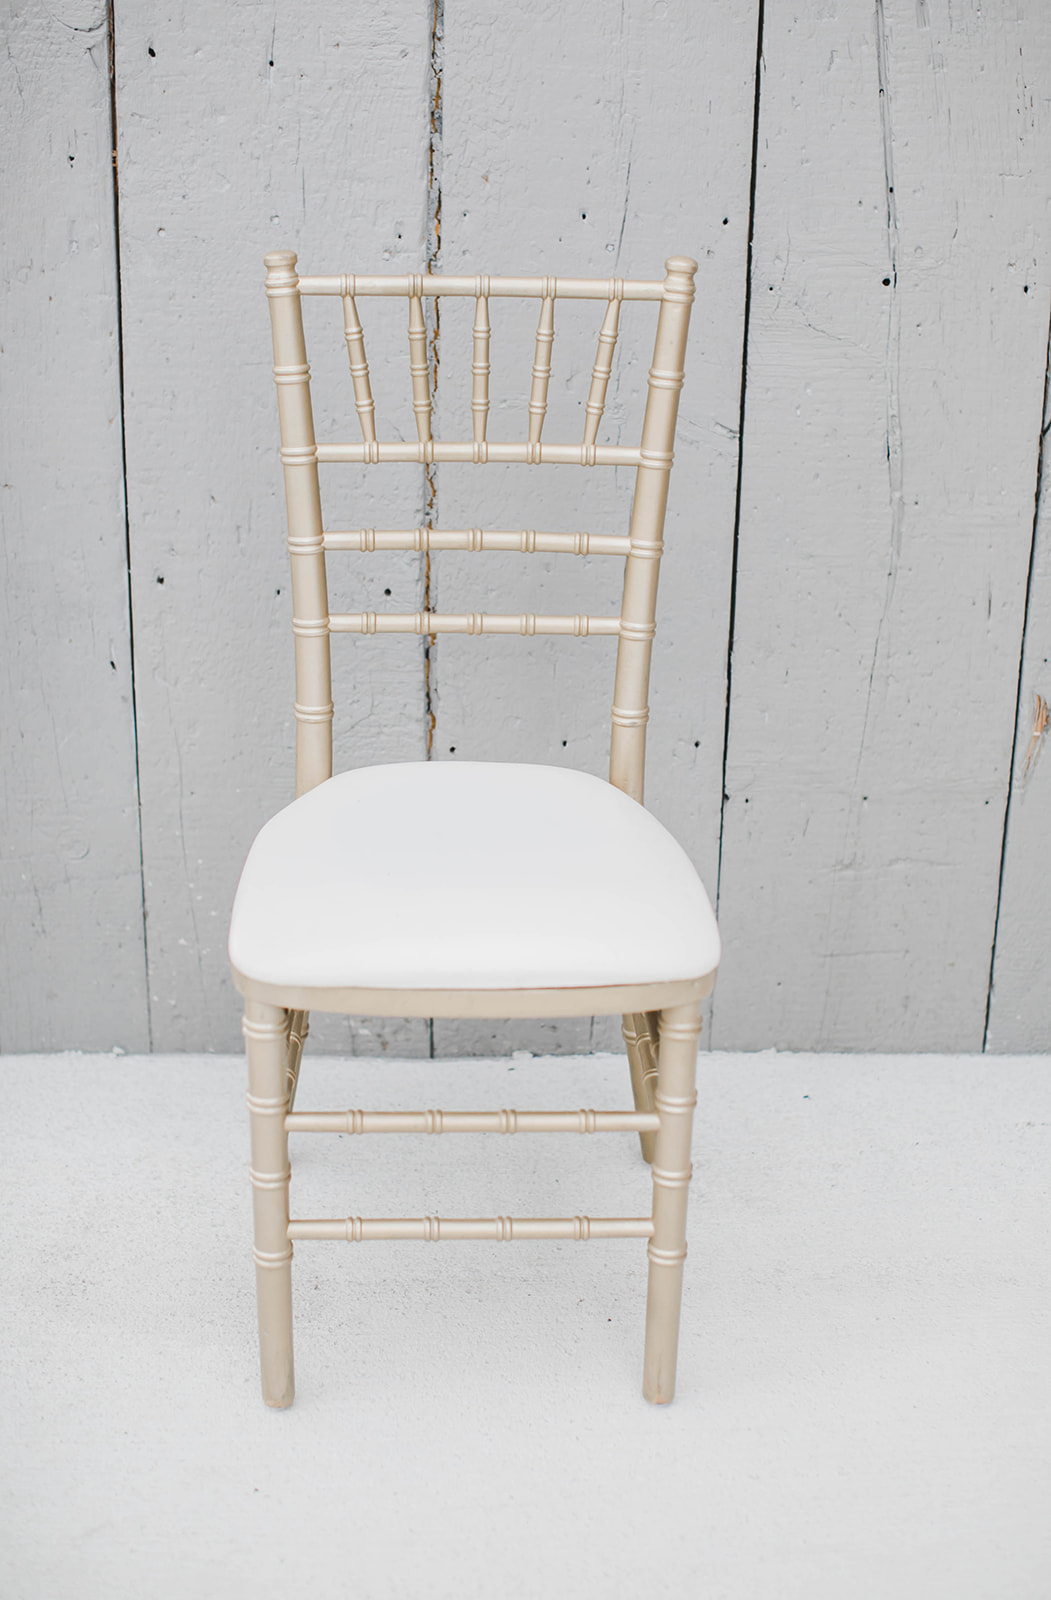 Chair Rental - Wedding And Event Rental